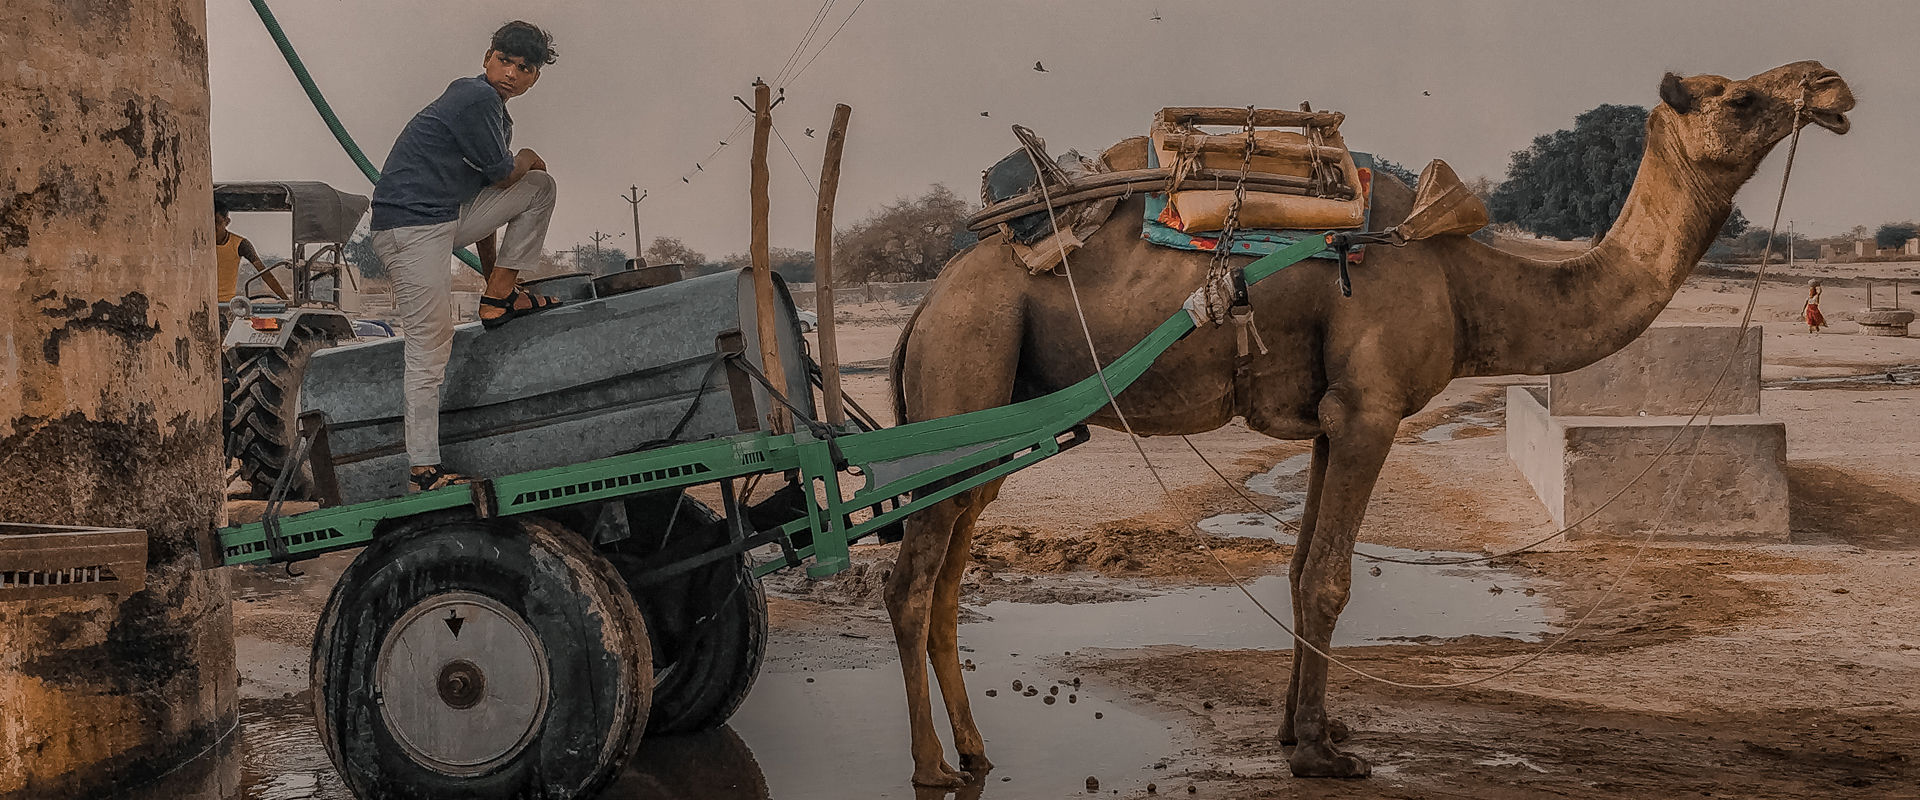 From liability to coexistence: Changing relations of camels with the community